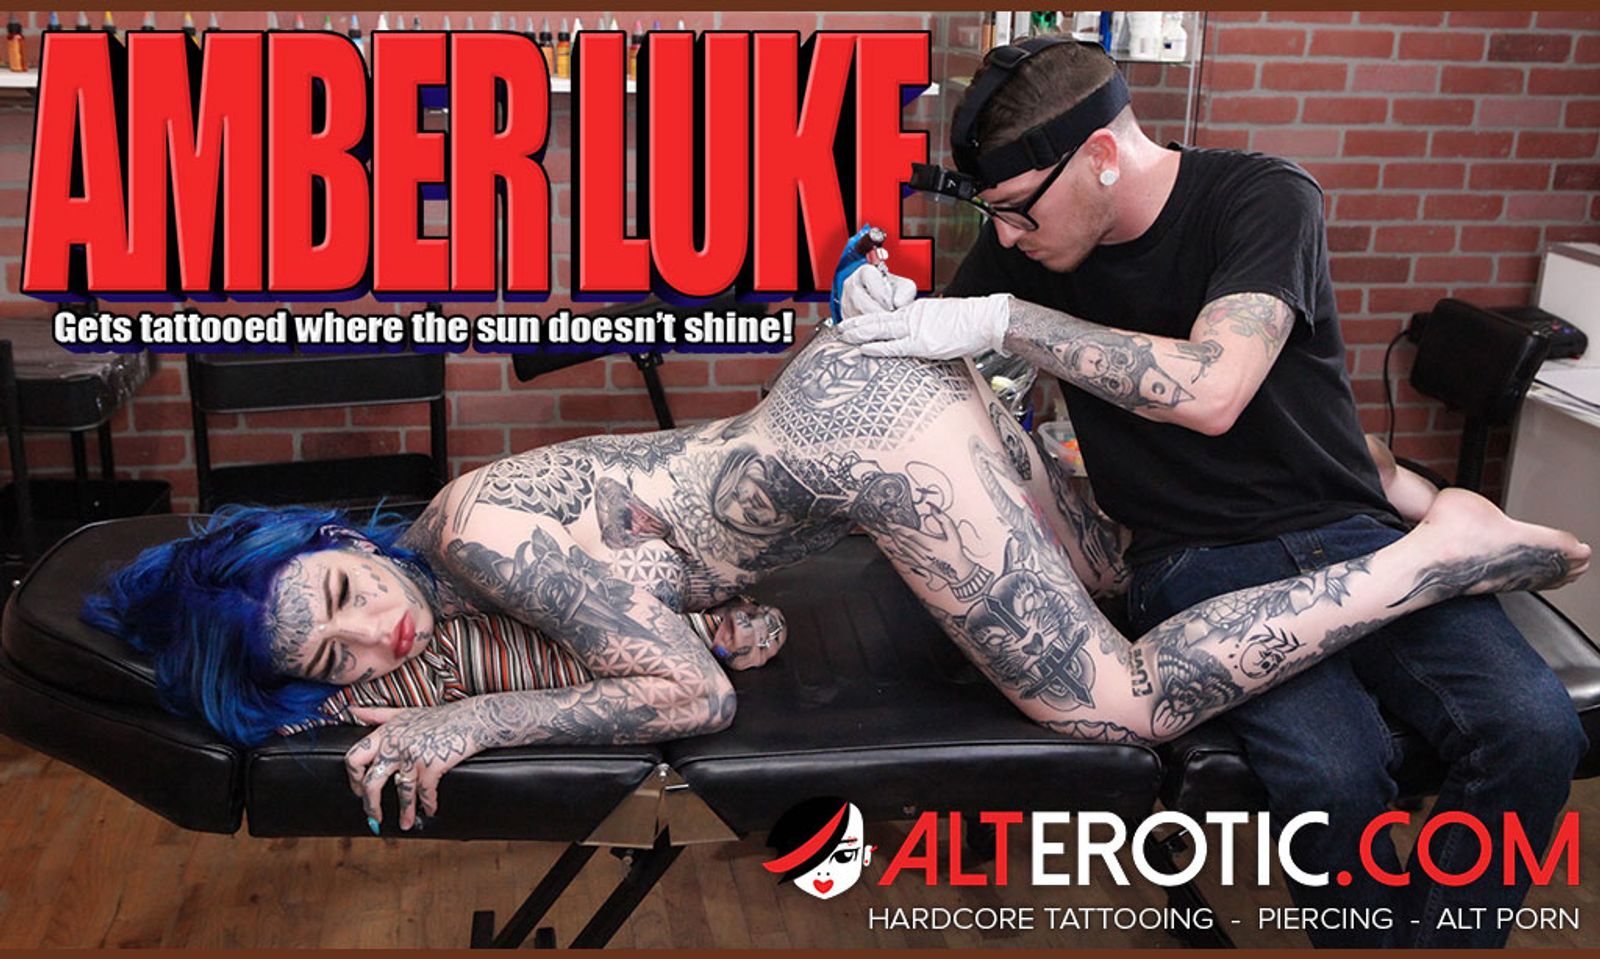 In New ALTErotic.com Scene, Amber Luke Gets Her Butthole Tattooed